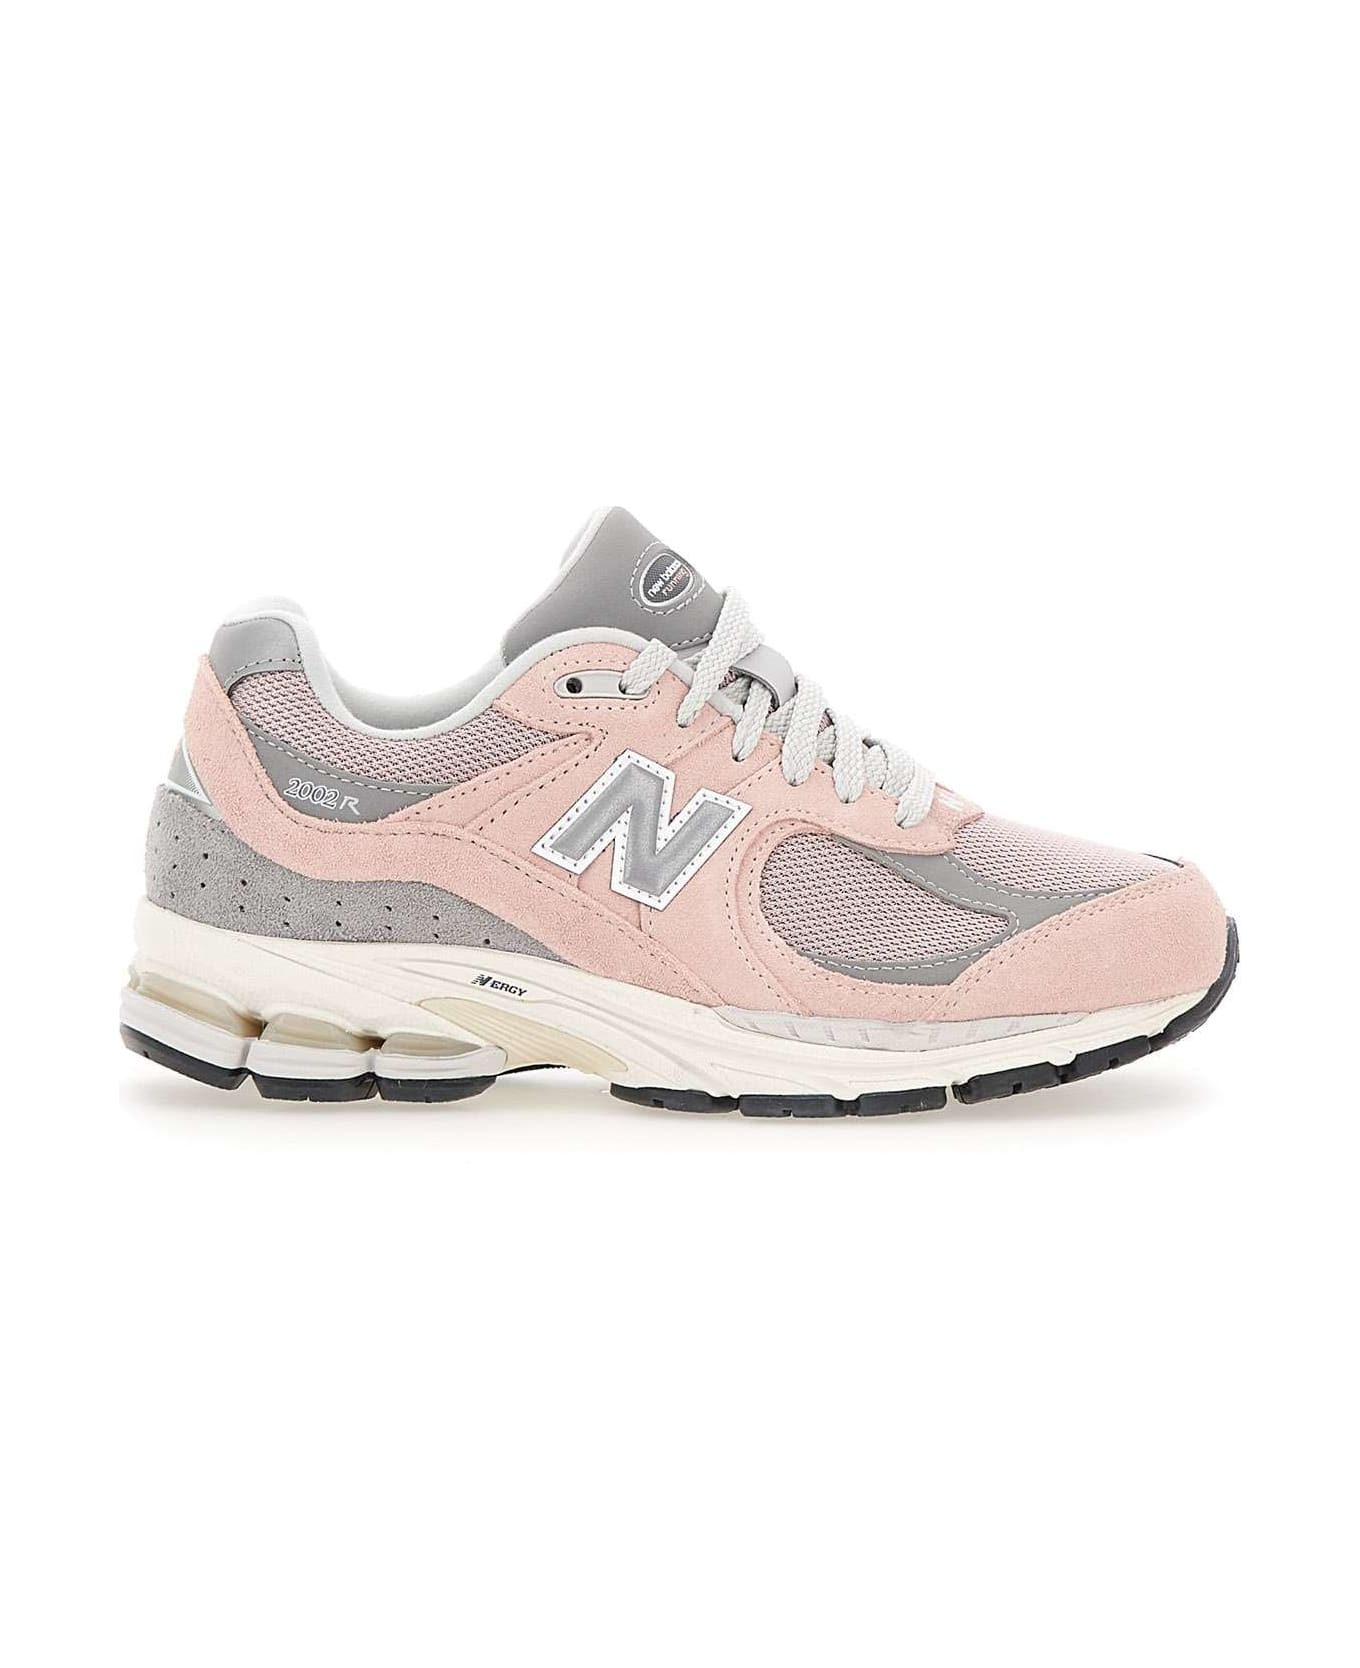 New Balance "m2002" Sneakers - PINK スニーカー